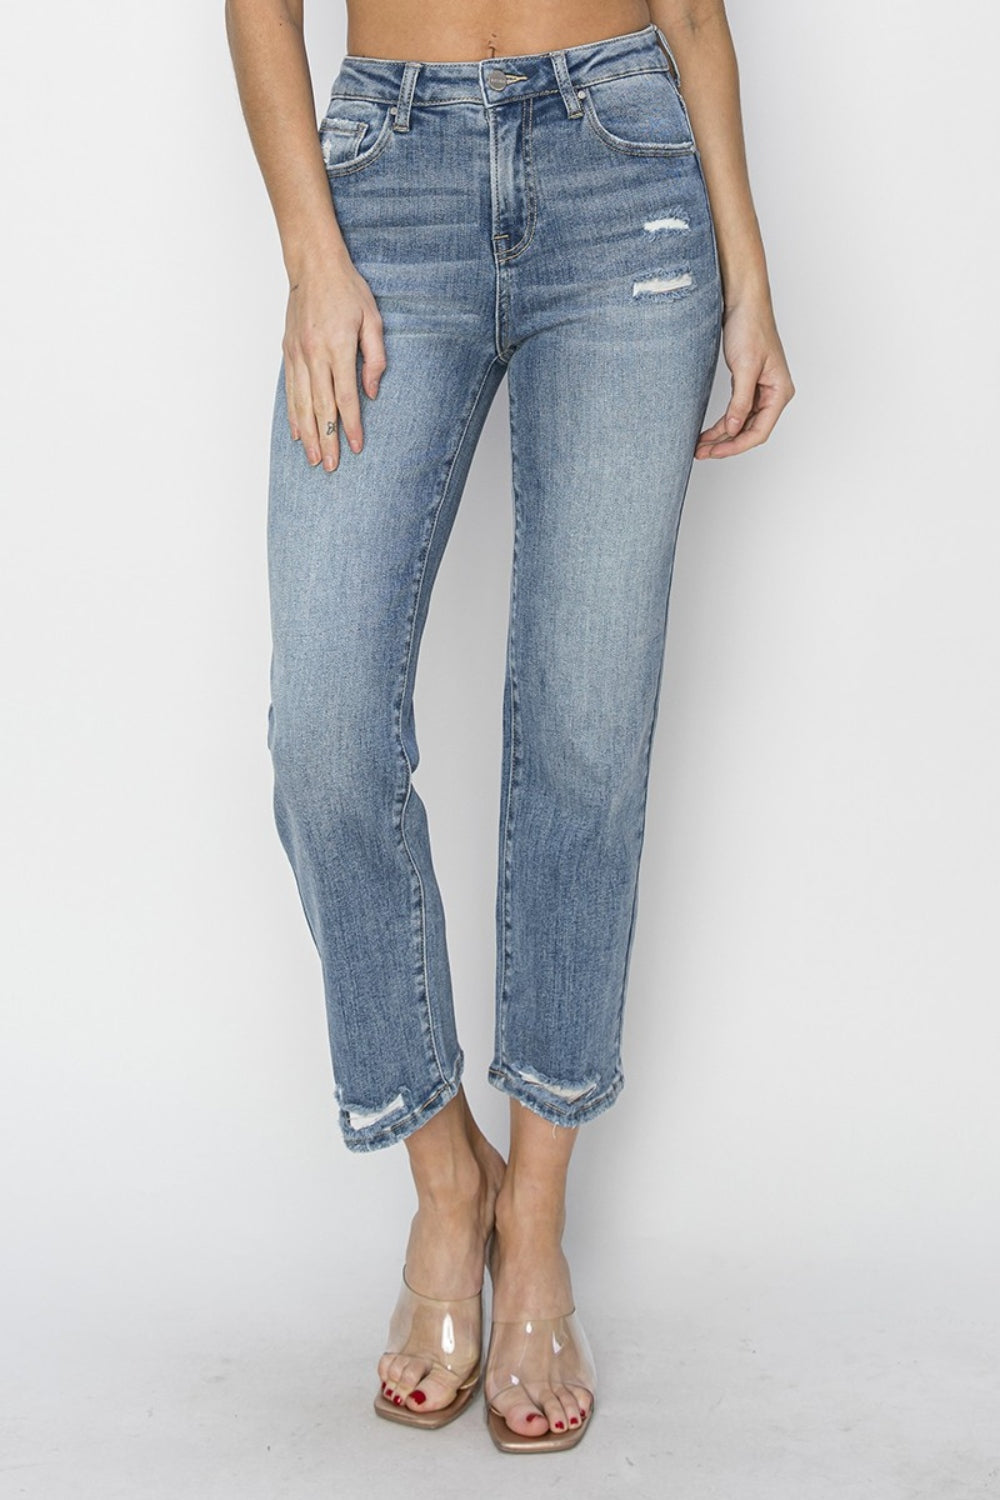 RISEN Full Size High Waist Distressed Cropped Jeans - Sydney So Sweet